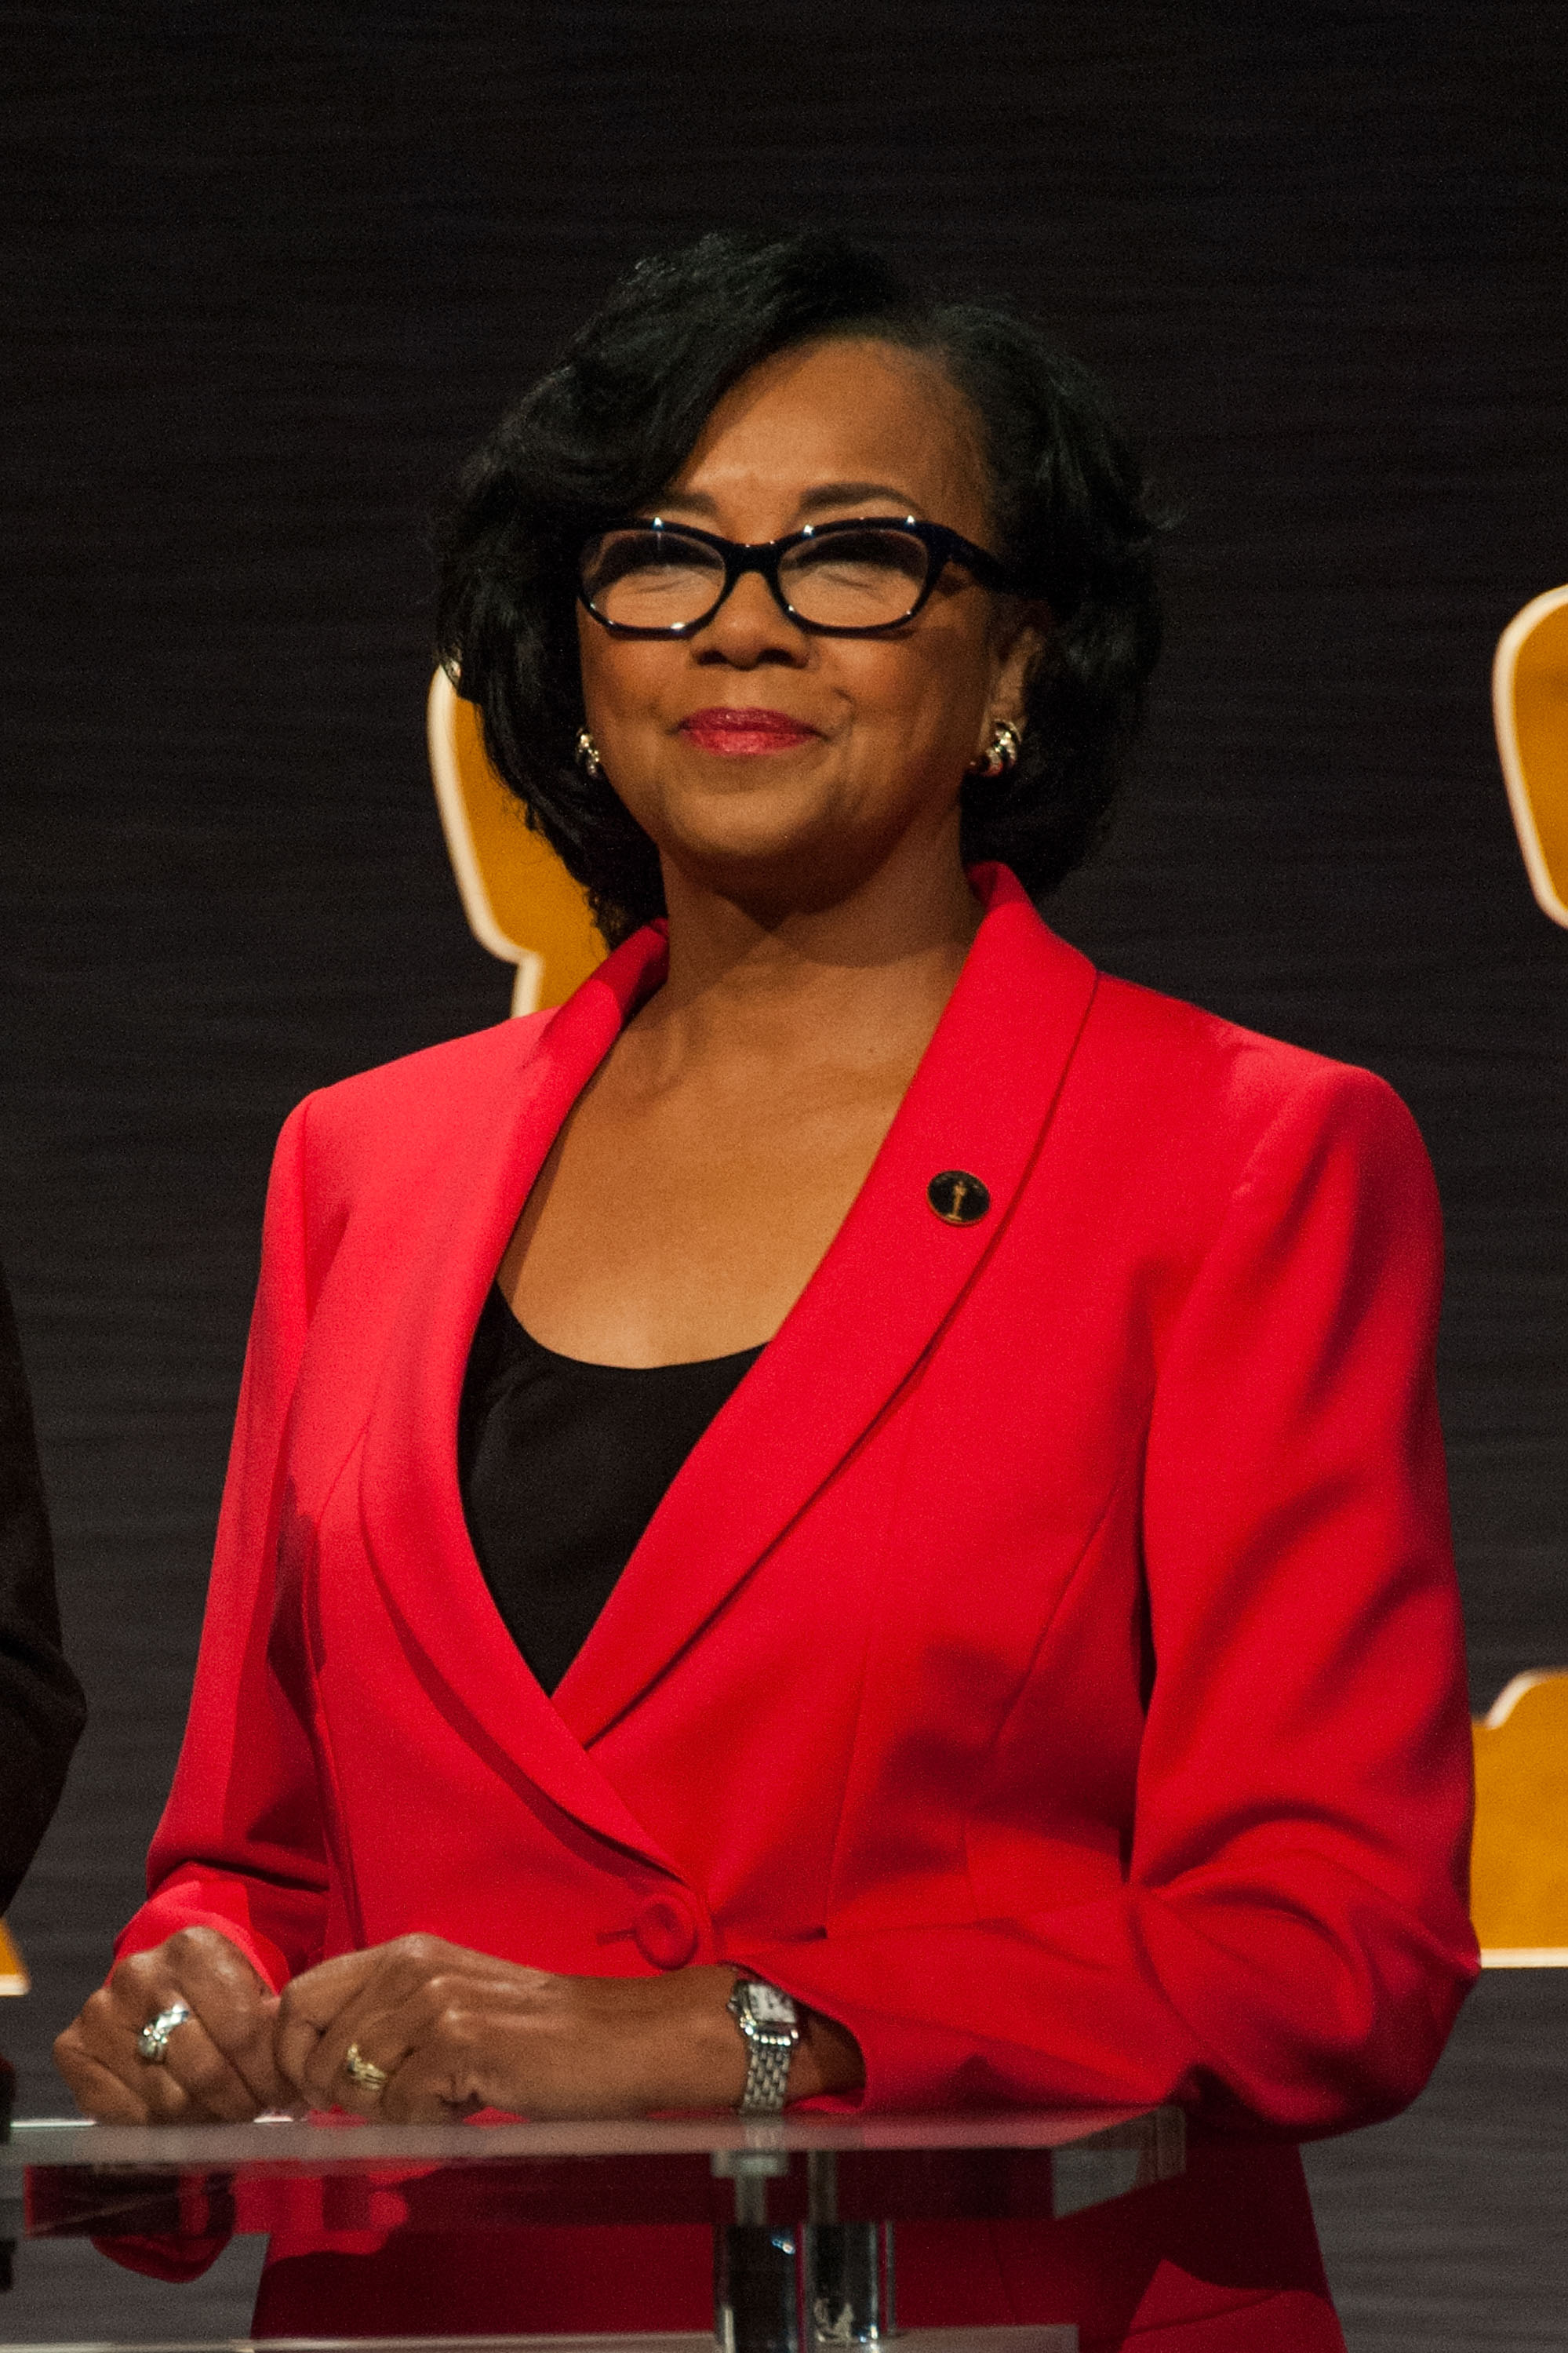 Academy President Cheryl Boone Isaacs attends the 87th Academy Awards Nominations Announcement at AMPAS Samuel Goldwyn Theater on Jan. 15, 2015 in Beverly Hills, California.